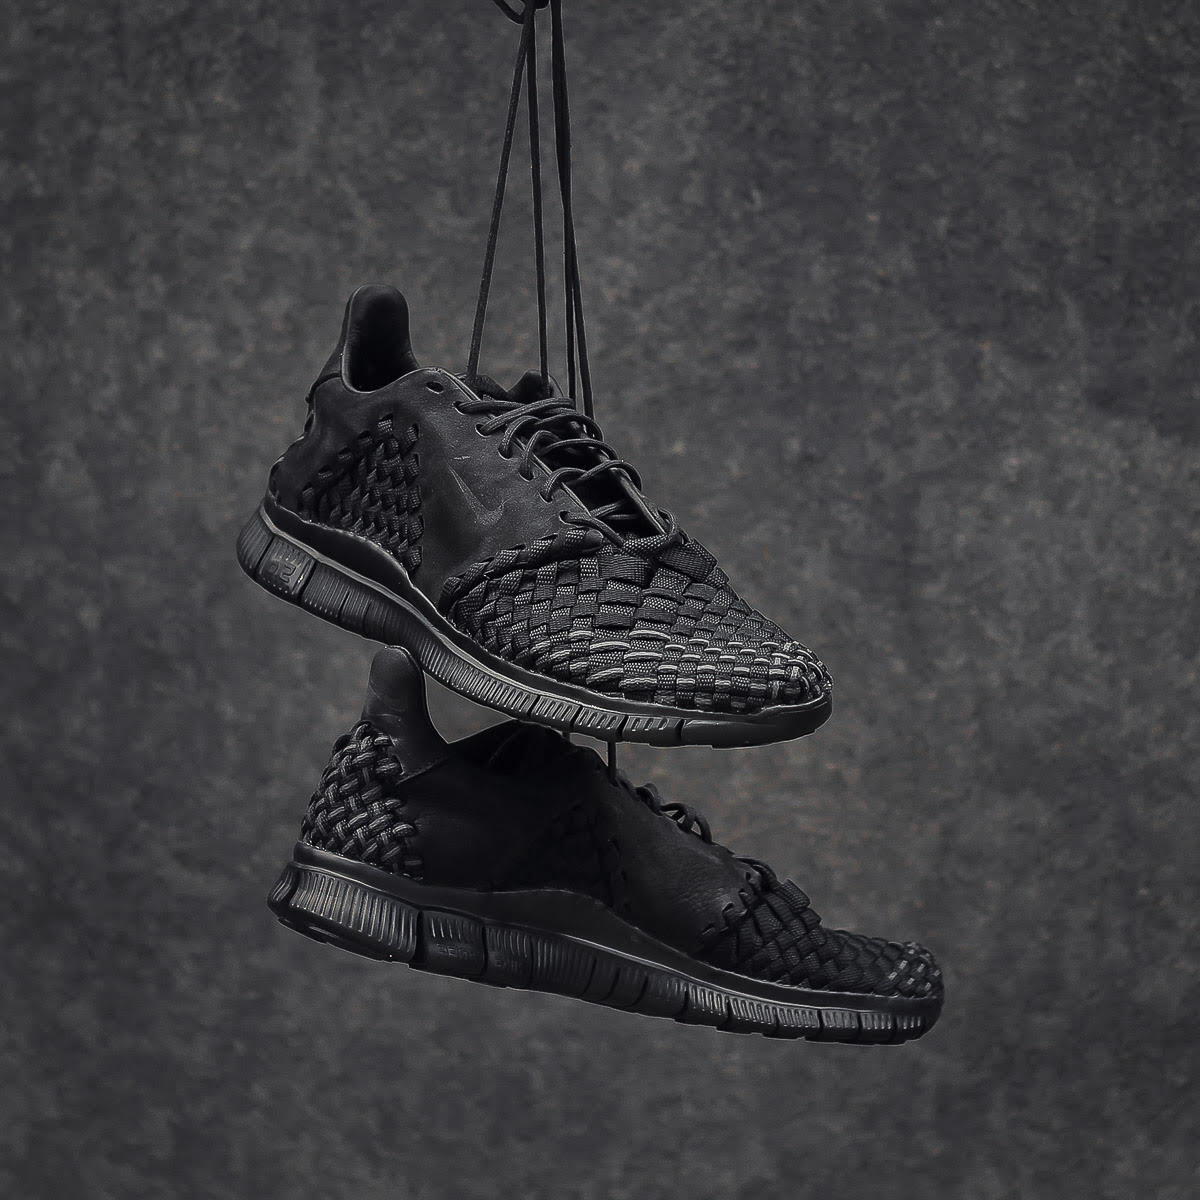 How the "Blackout" Nike Free Woven 2 Looks On-Foot | Complex